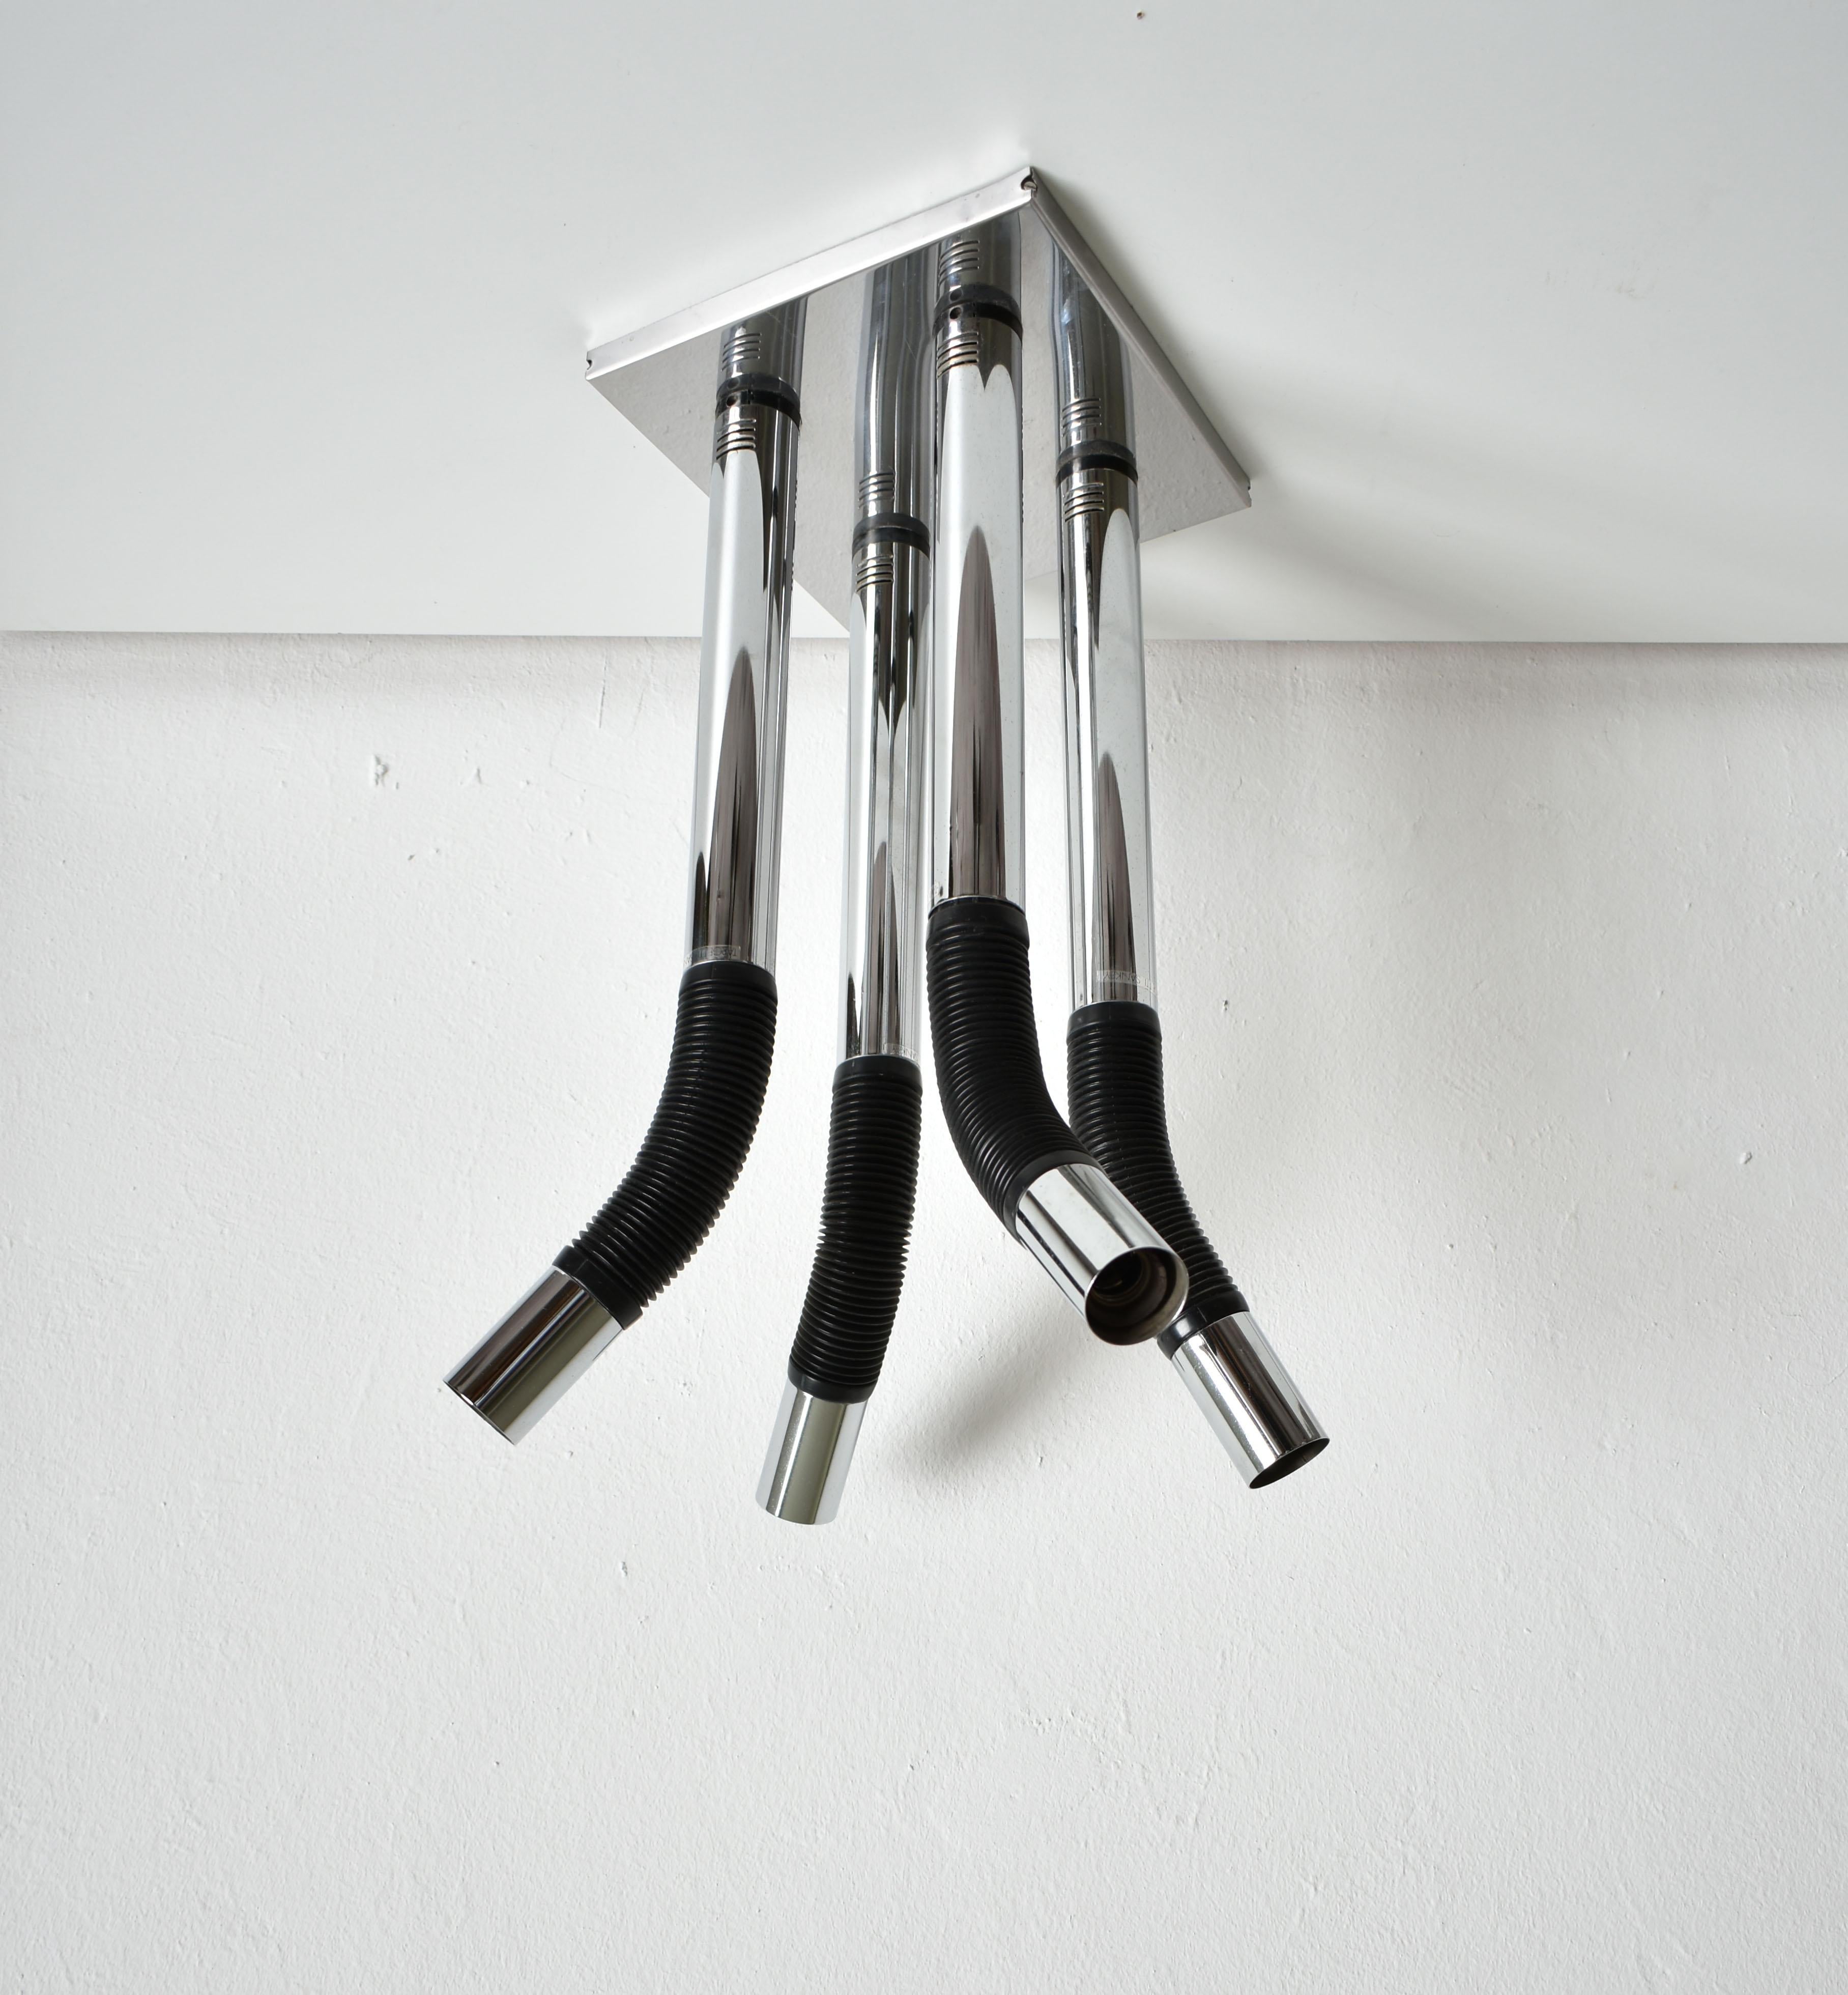 Metal Space Age Chandelier Elbow by M. Bellini for Targetti Sankey, Italy, 1970s 1980s For Sale